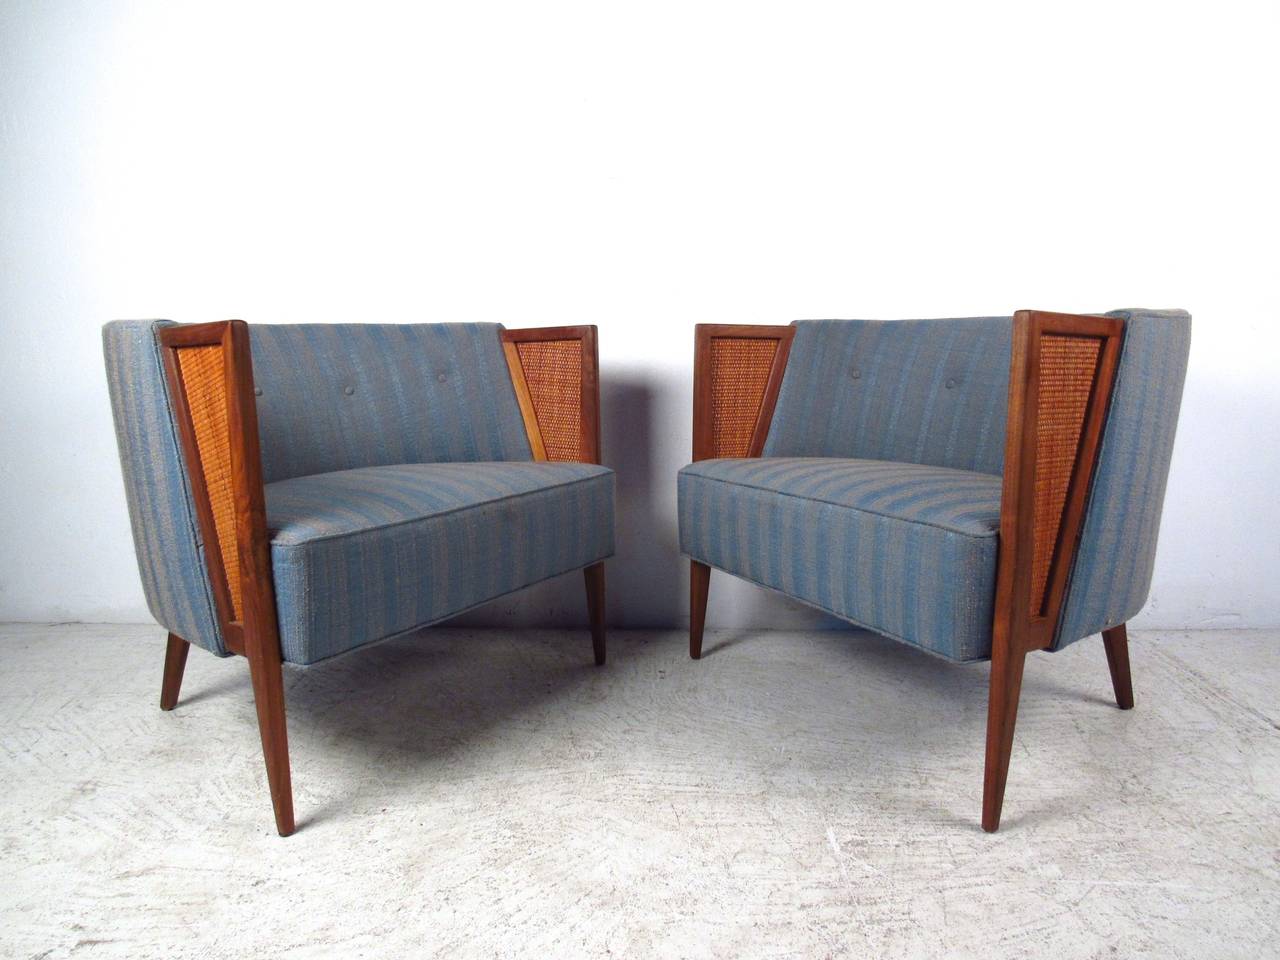 This exquisite pair of mid-century modern barrel back chairs feature unique design, perfect for any interior. Wonderful tapered legs, cane style seat back, and wide comfortable seats add to the midcentury charm of the pair. Great side chairs for